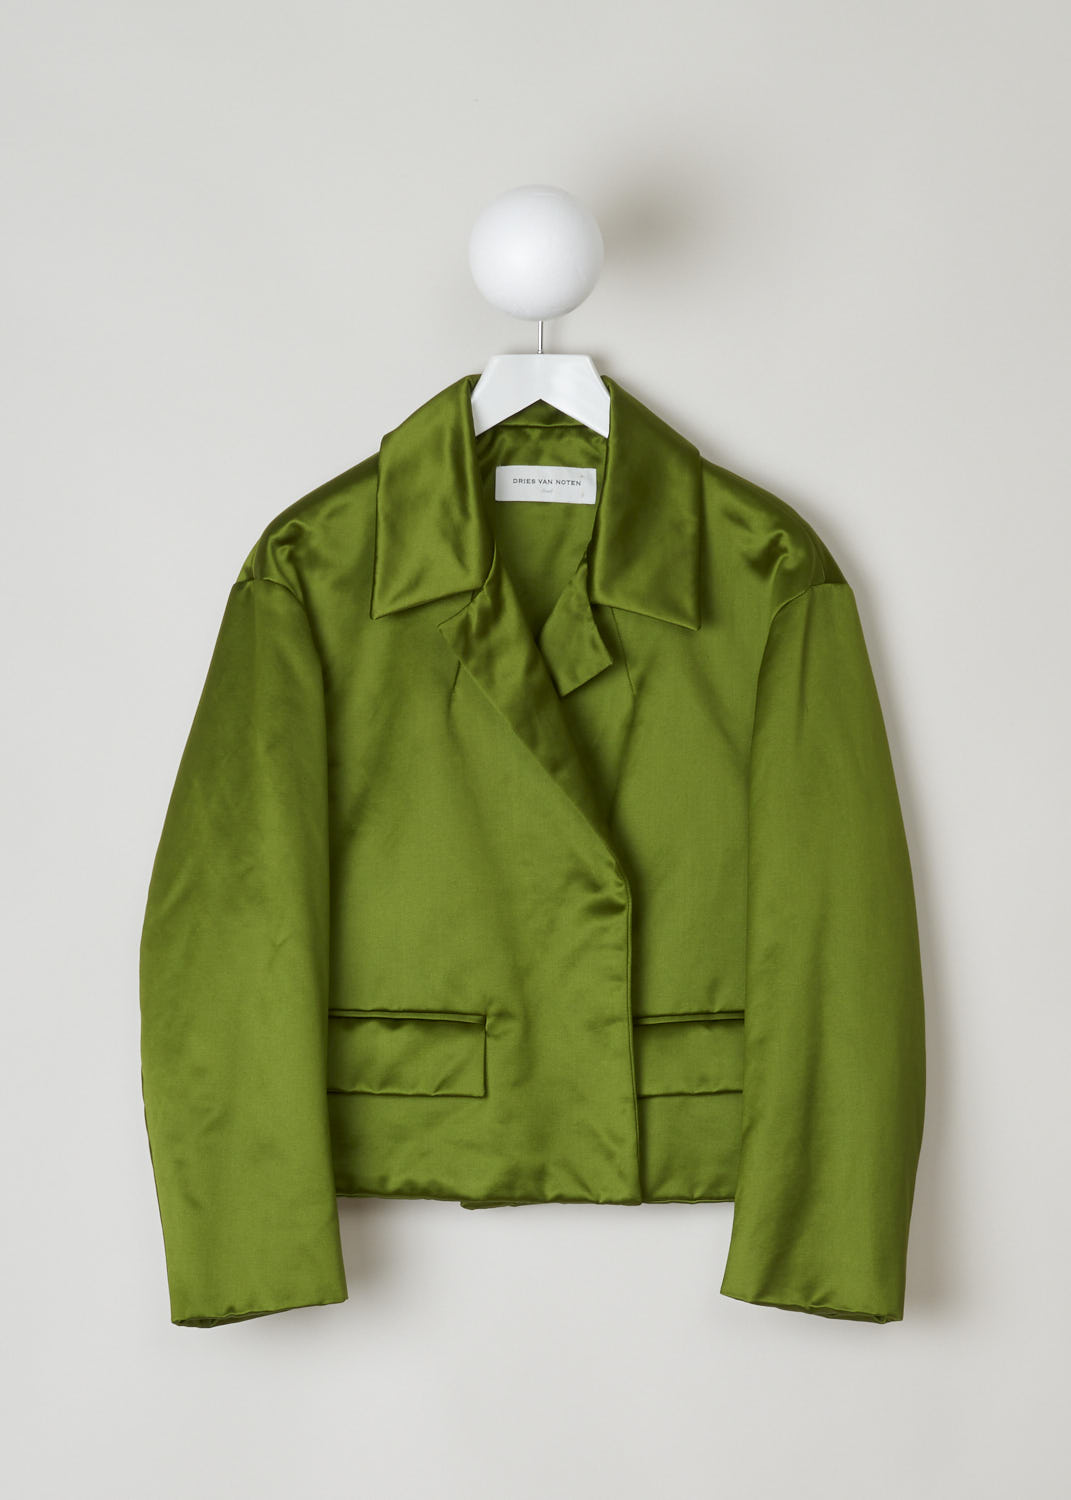 DRIES VAN NOTEN, METALLIC GREEN CROPPED JACKET, VONDI_3356_WW_JACKET_GRE, Green, Front, This silky smooth cropped jacket has a notched lapel. The jacket does not have a closing function, meaning the jacket is open in the front. Two welt pockets with a flap can be found on the front of the jacket. 